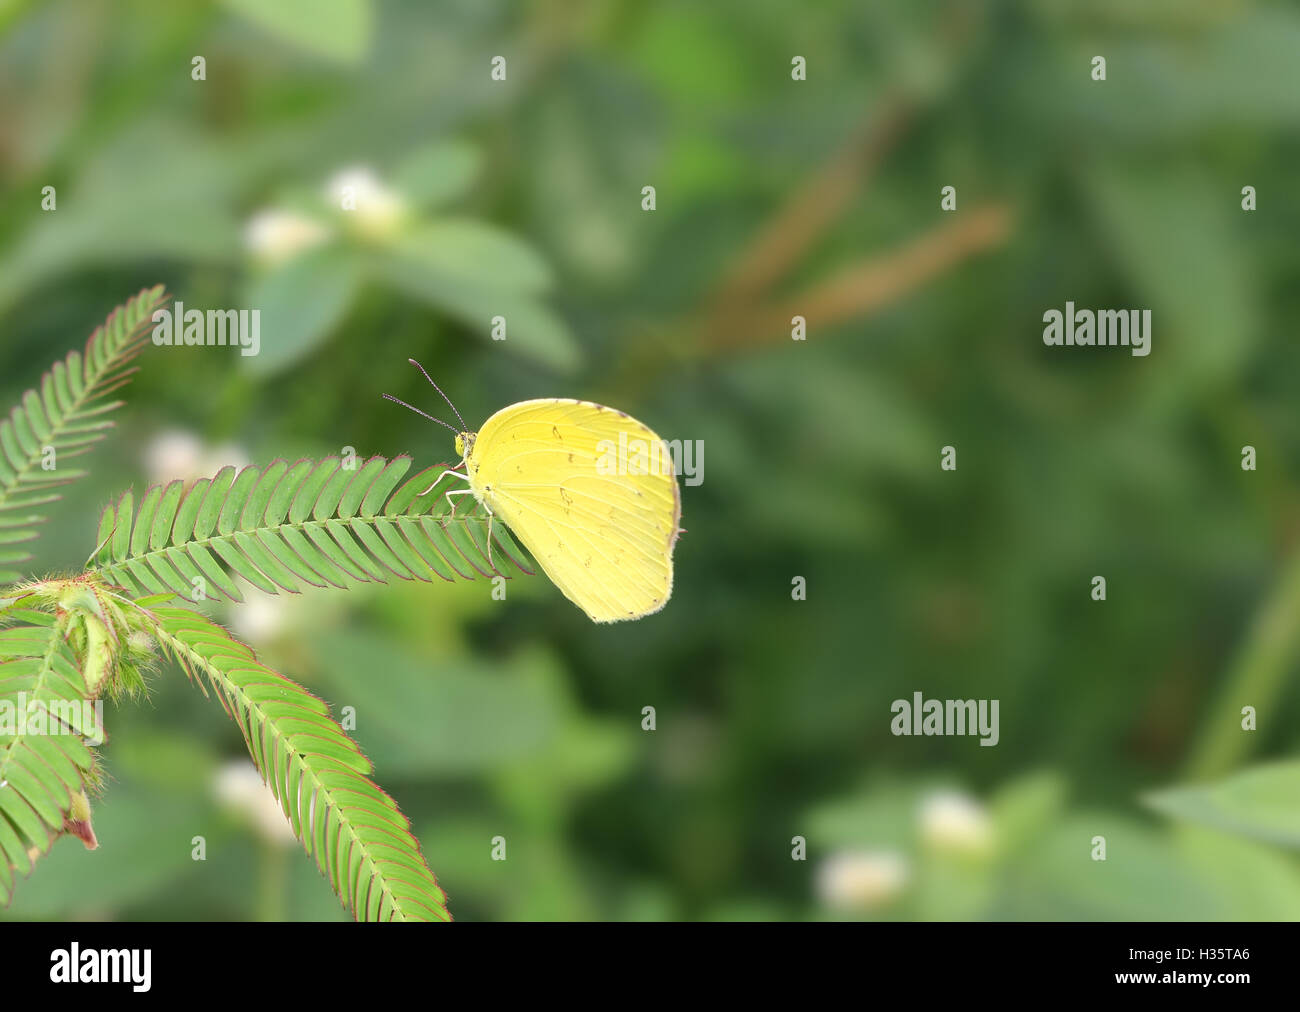 Yellow Clouded Sulphur Butterfly, Colias euxanthe, sitting on a bush branch Stock Photo